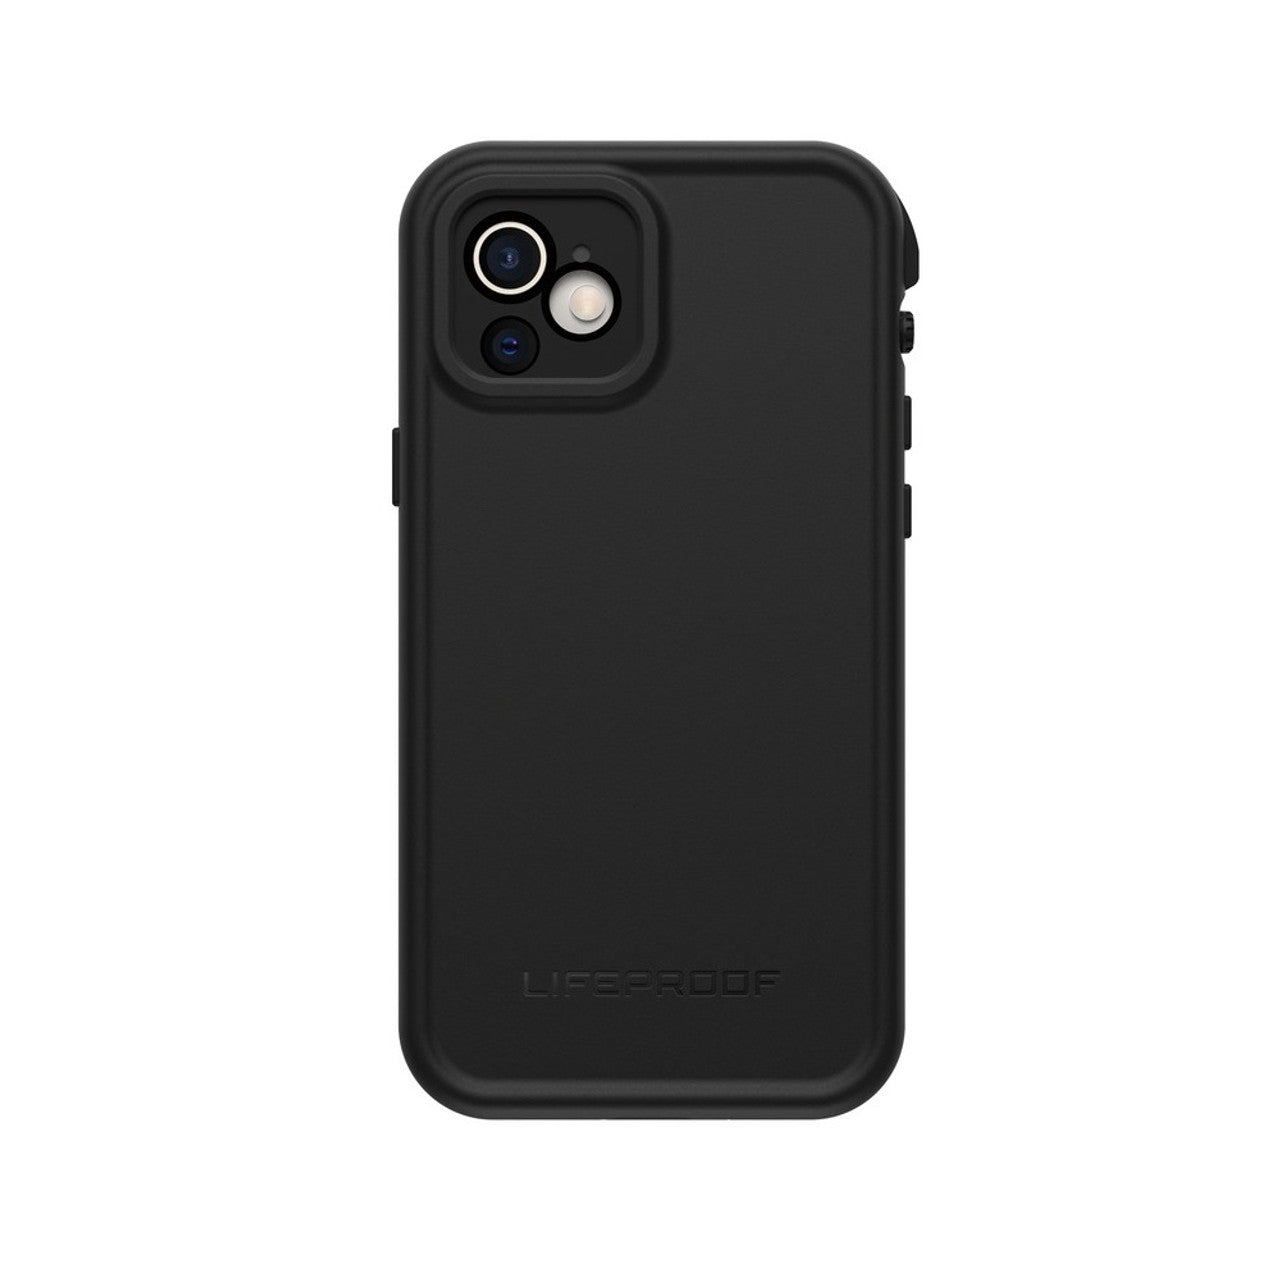 LIFEPROOF FRE CASE FOR IPHONE  12 PRO MAX -BLACK - NEW